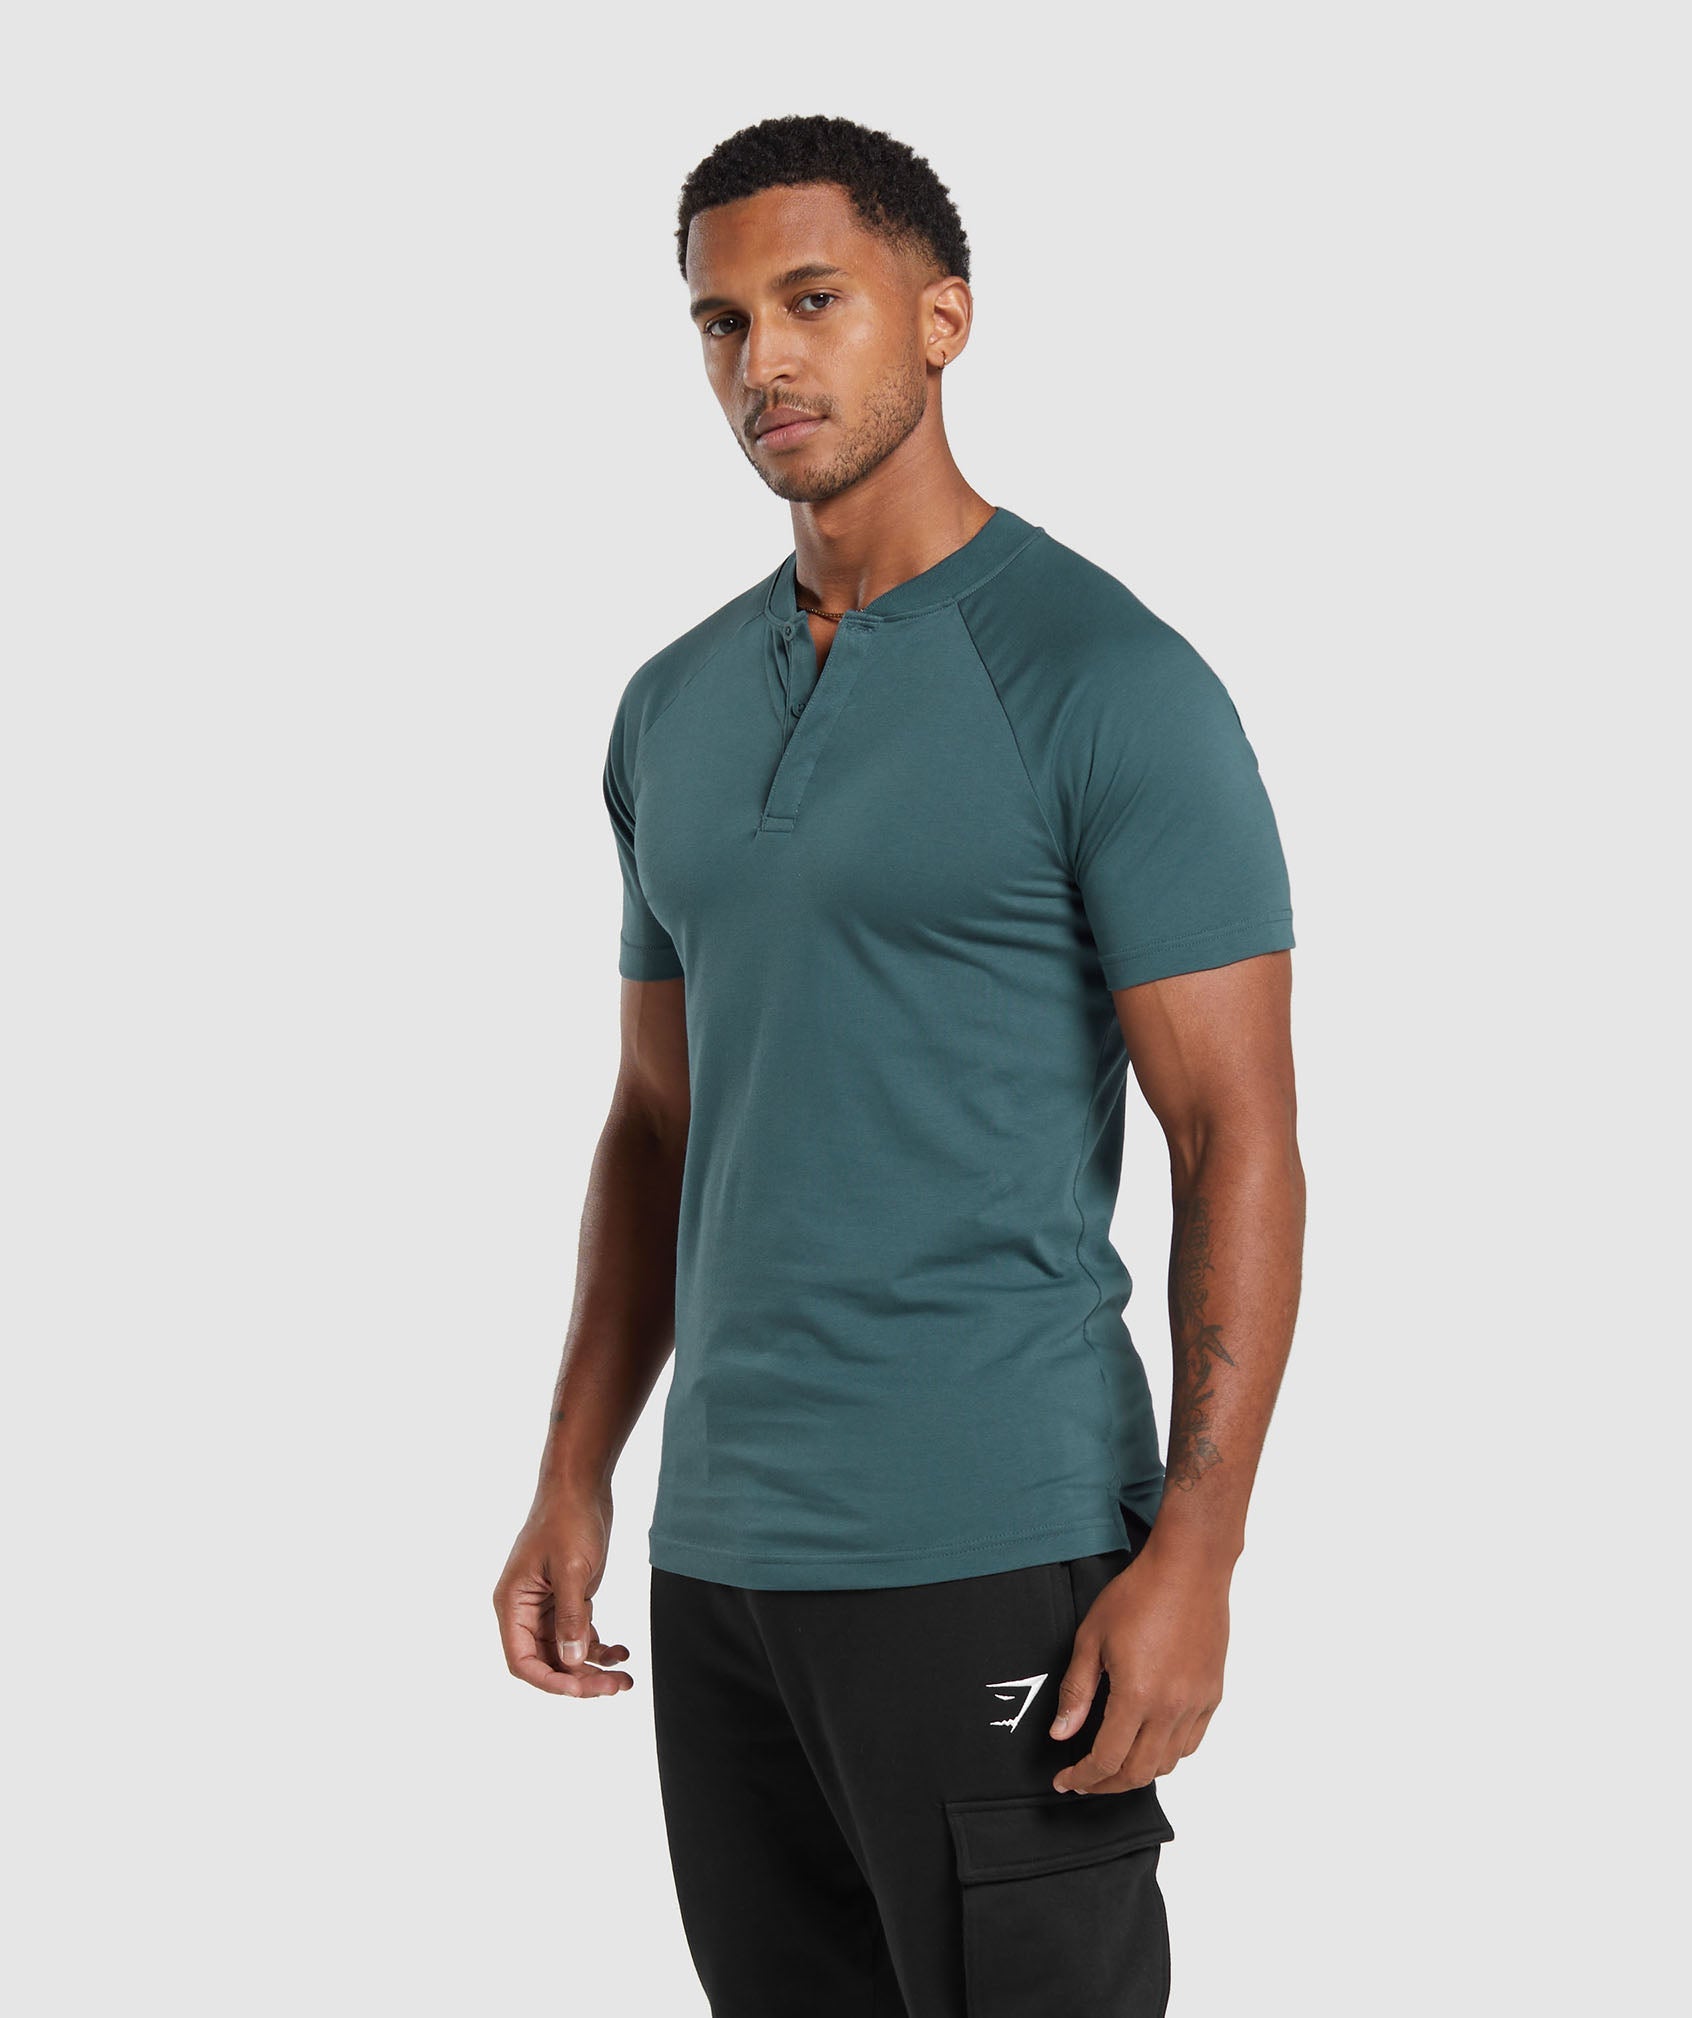 Rest Day Commute Polo Shirt in Smokey Teal - view 3